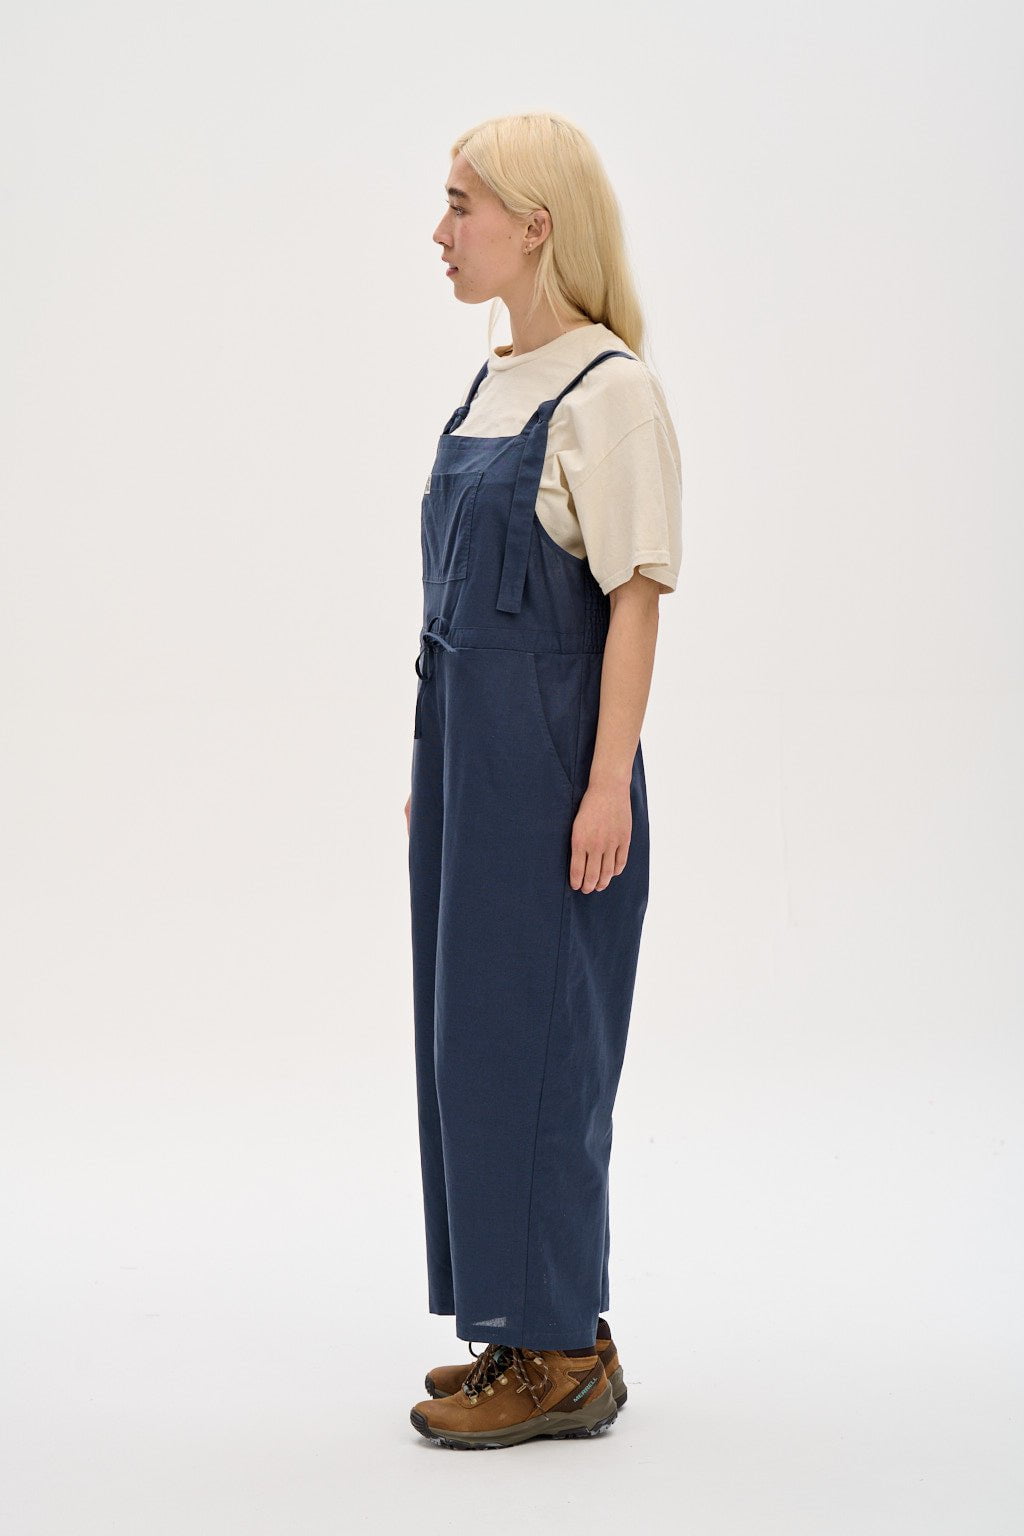 Lucy & Yak Dungarees Emmy Dungaree: ORGANIC COTTON & LINEN -  Navy Blue